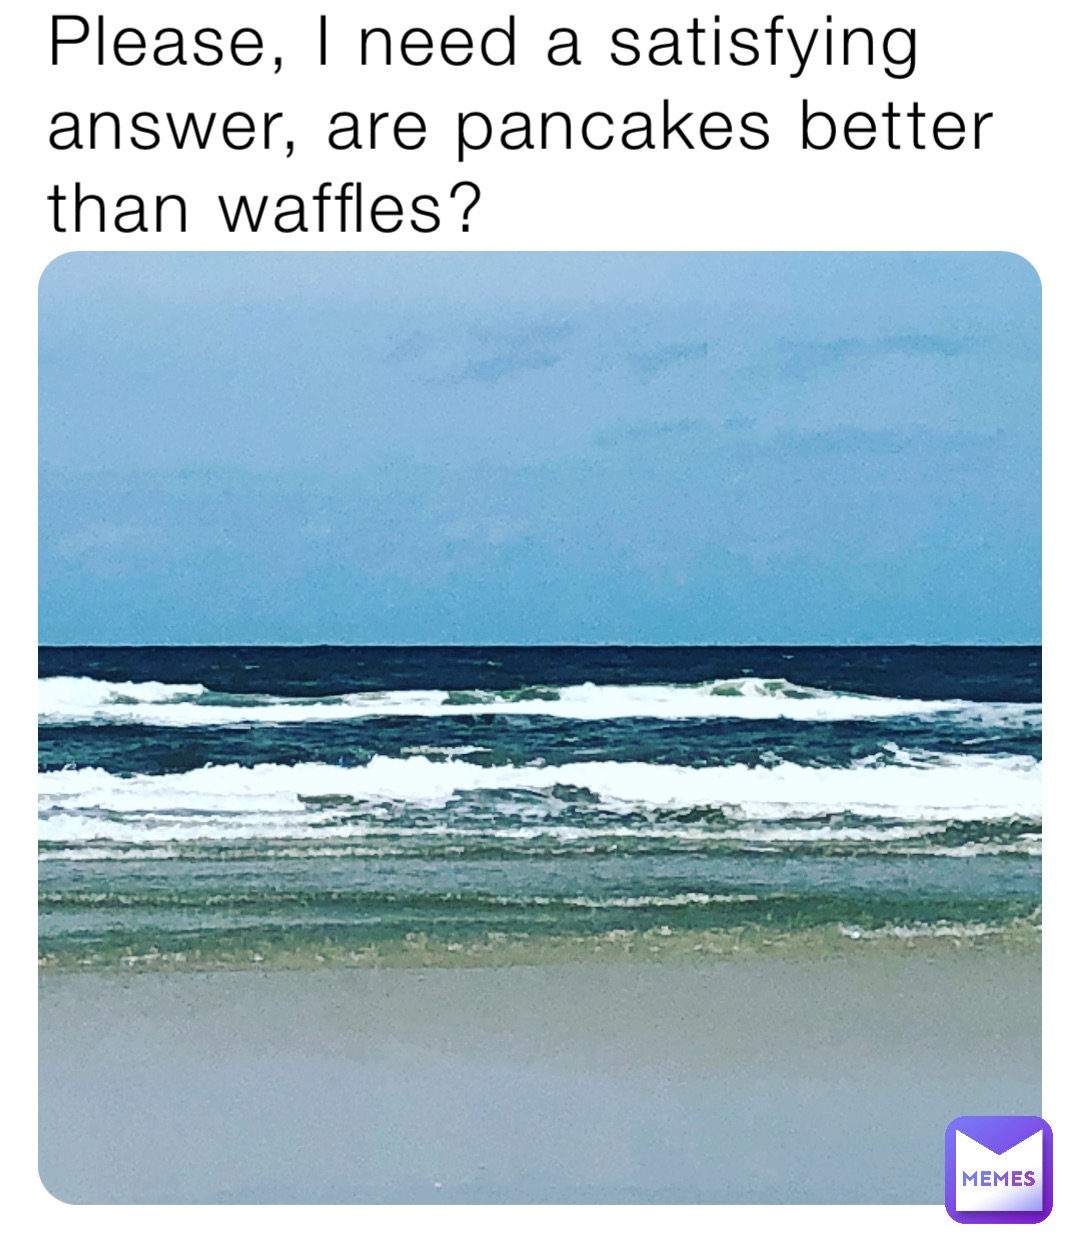 Please, I need a satisfying answer, are pancakes better than waffles?